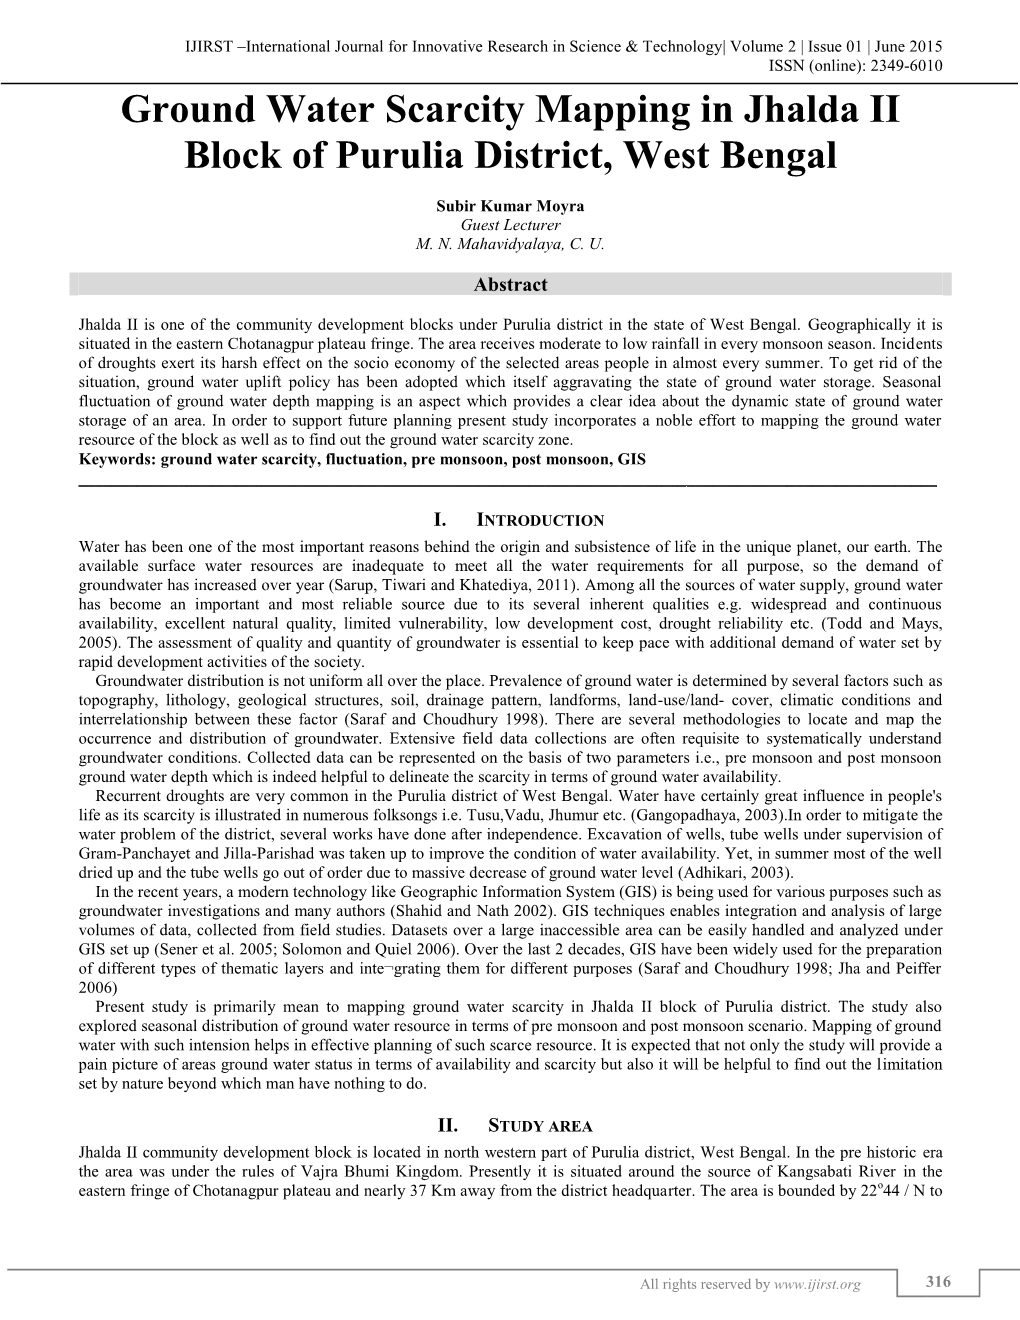 Ground Water Scarcity Mapping in Jhalda II Block of Purulia District, West Bengal (IJIRST/ Volume 2 / Issue 01 / 046)